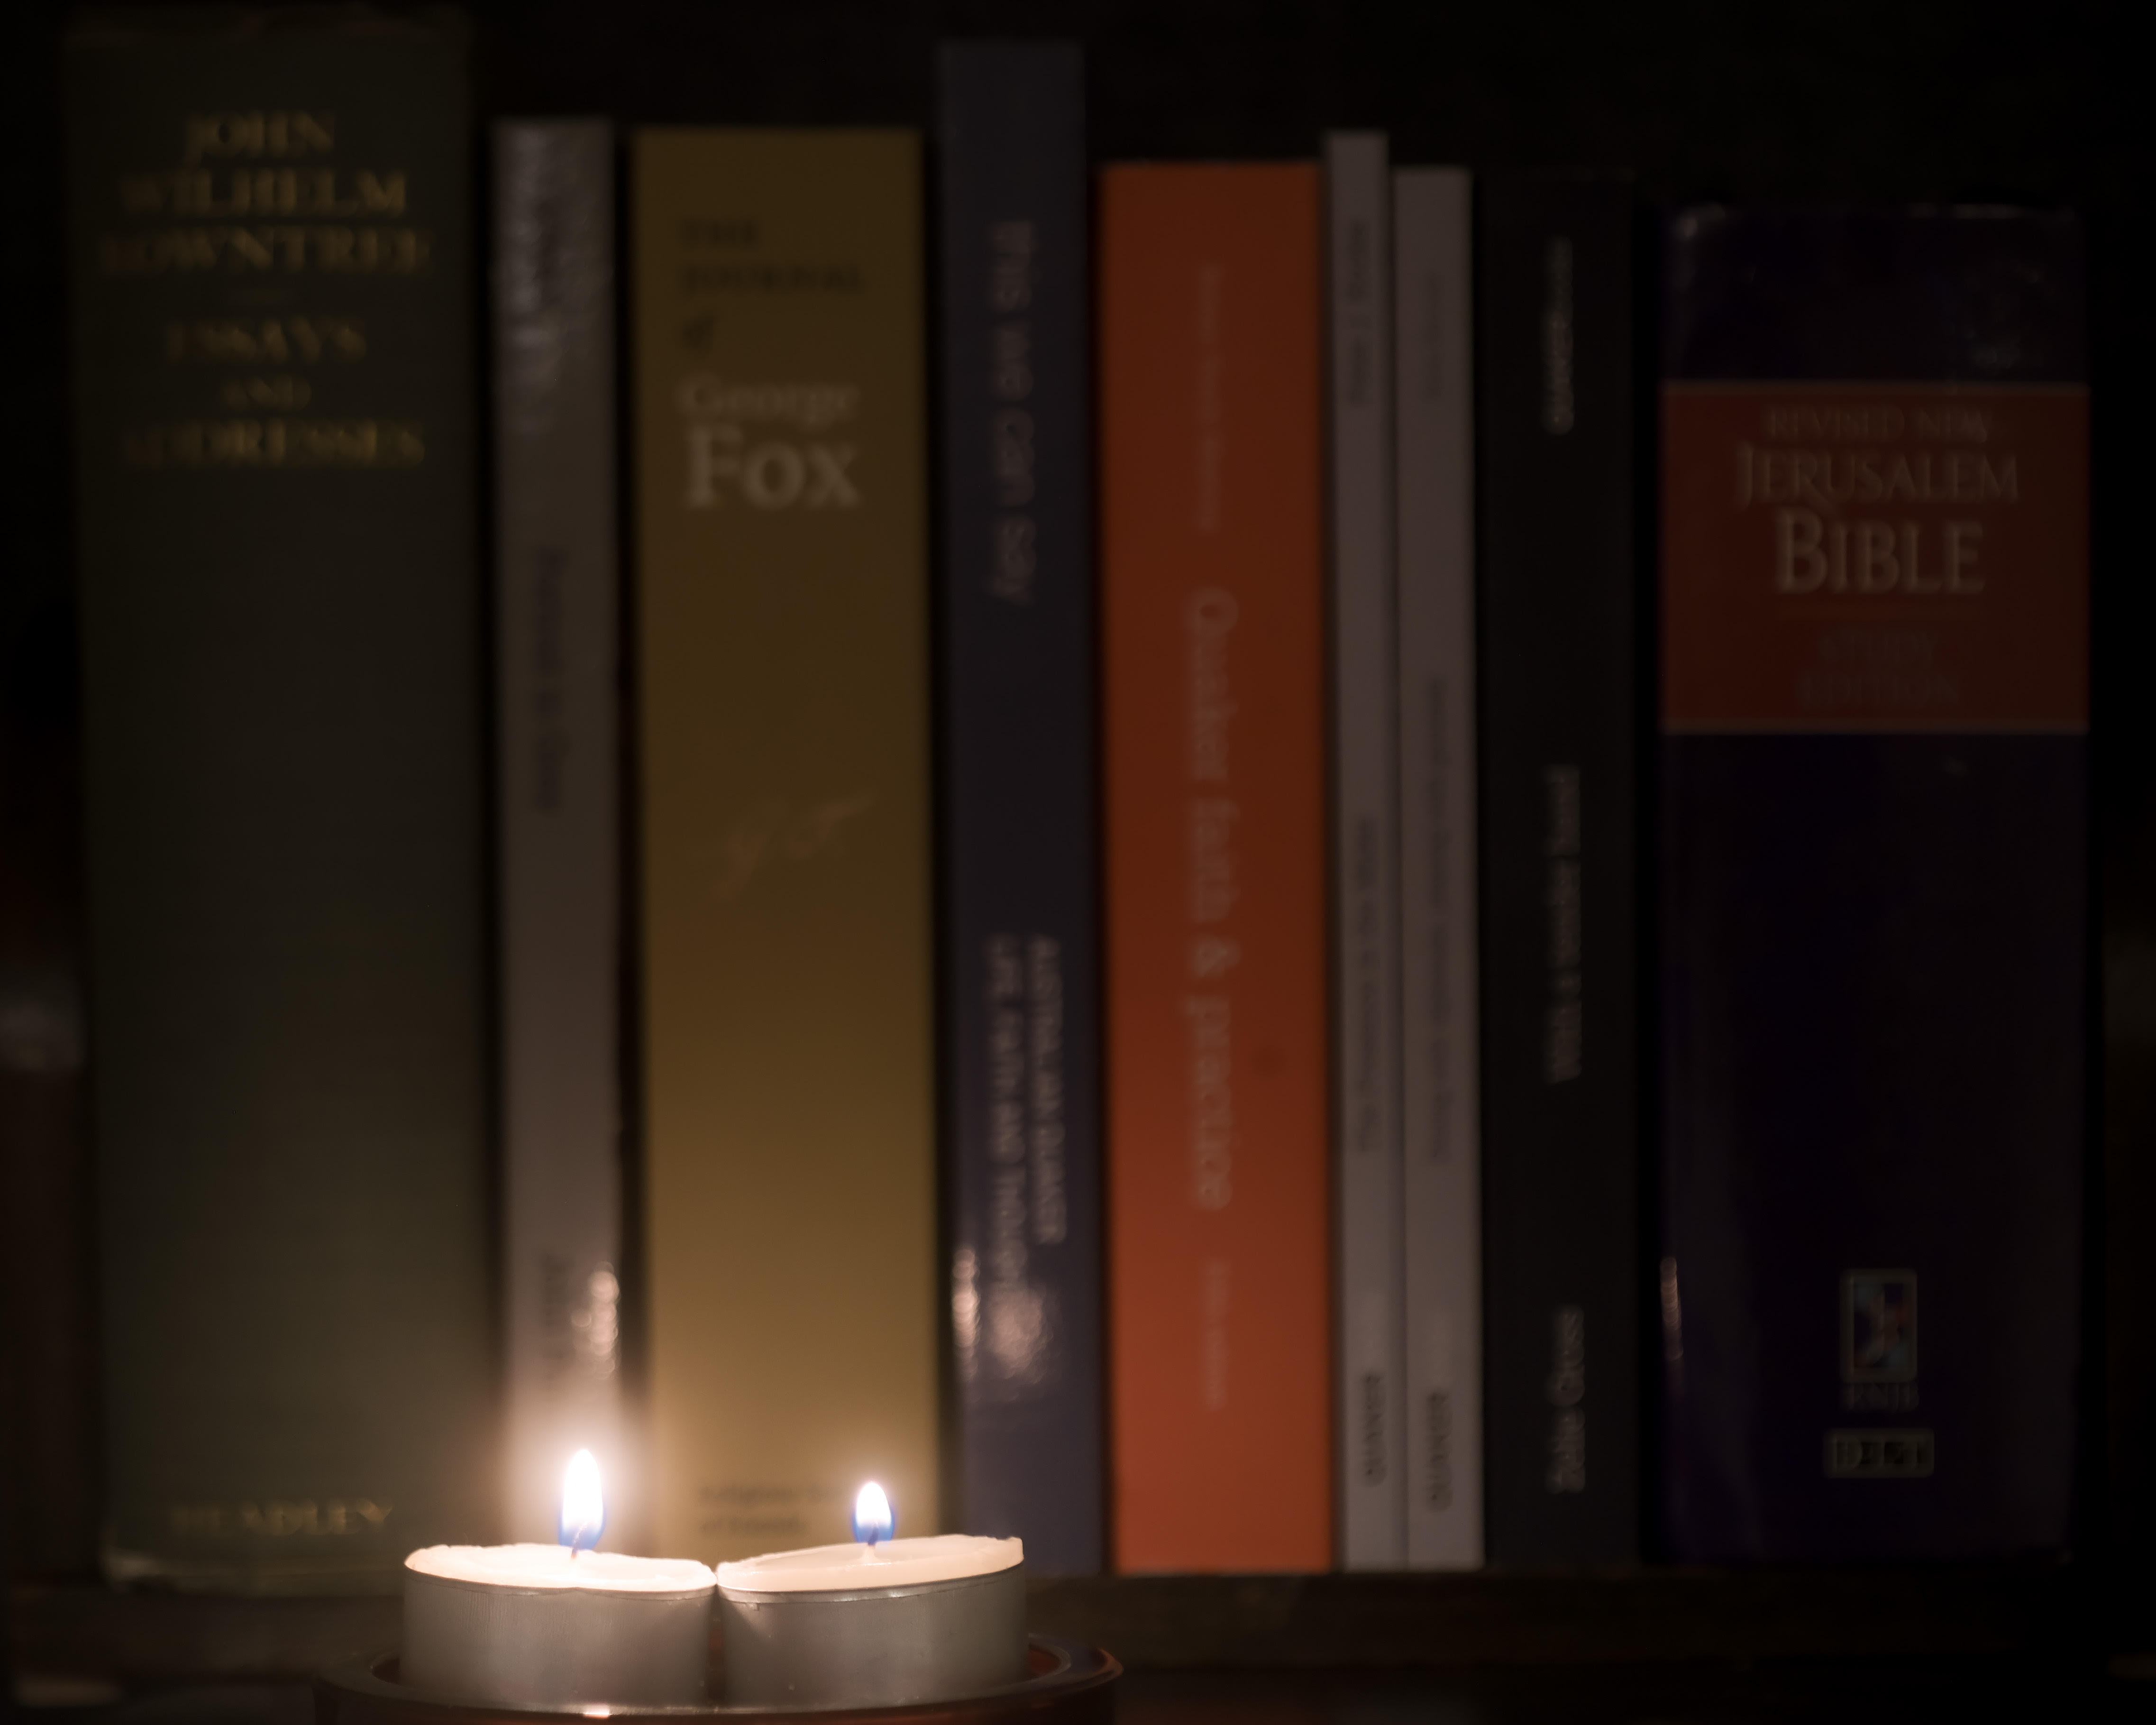 two small candles in front of books